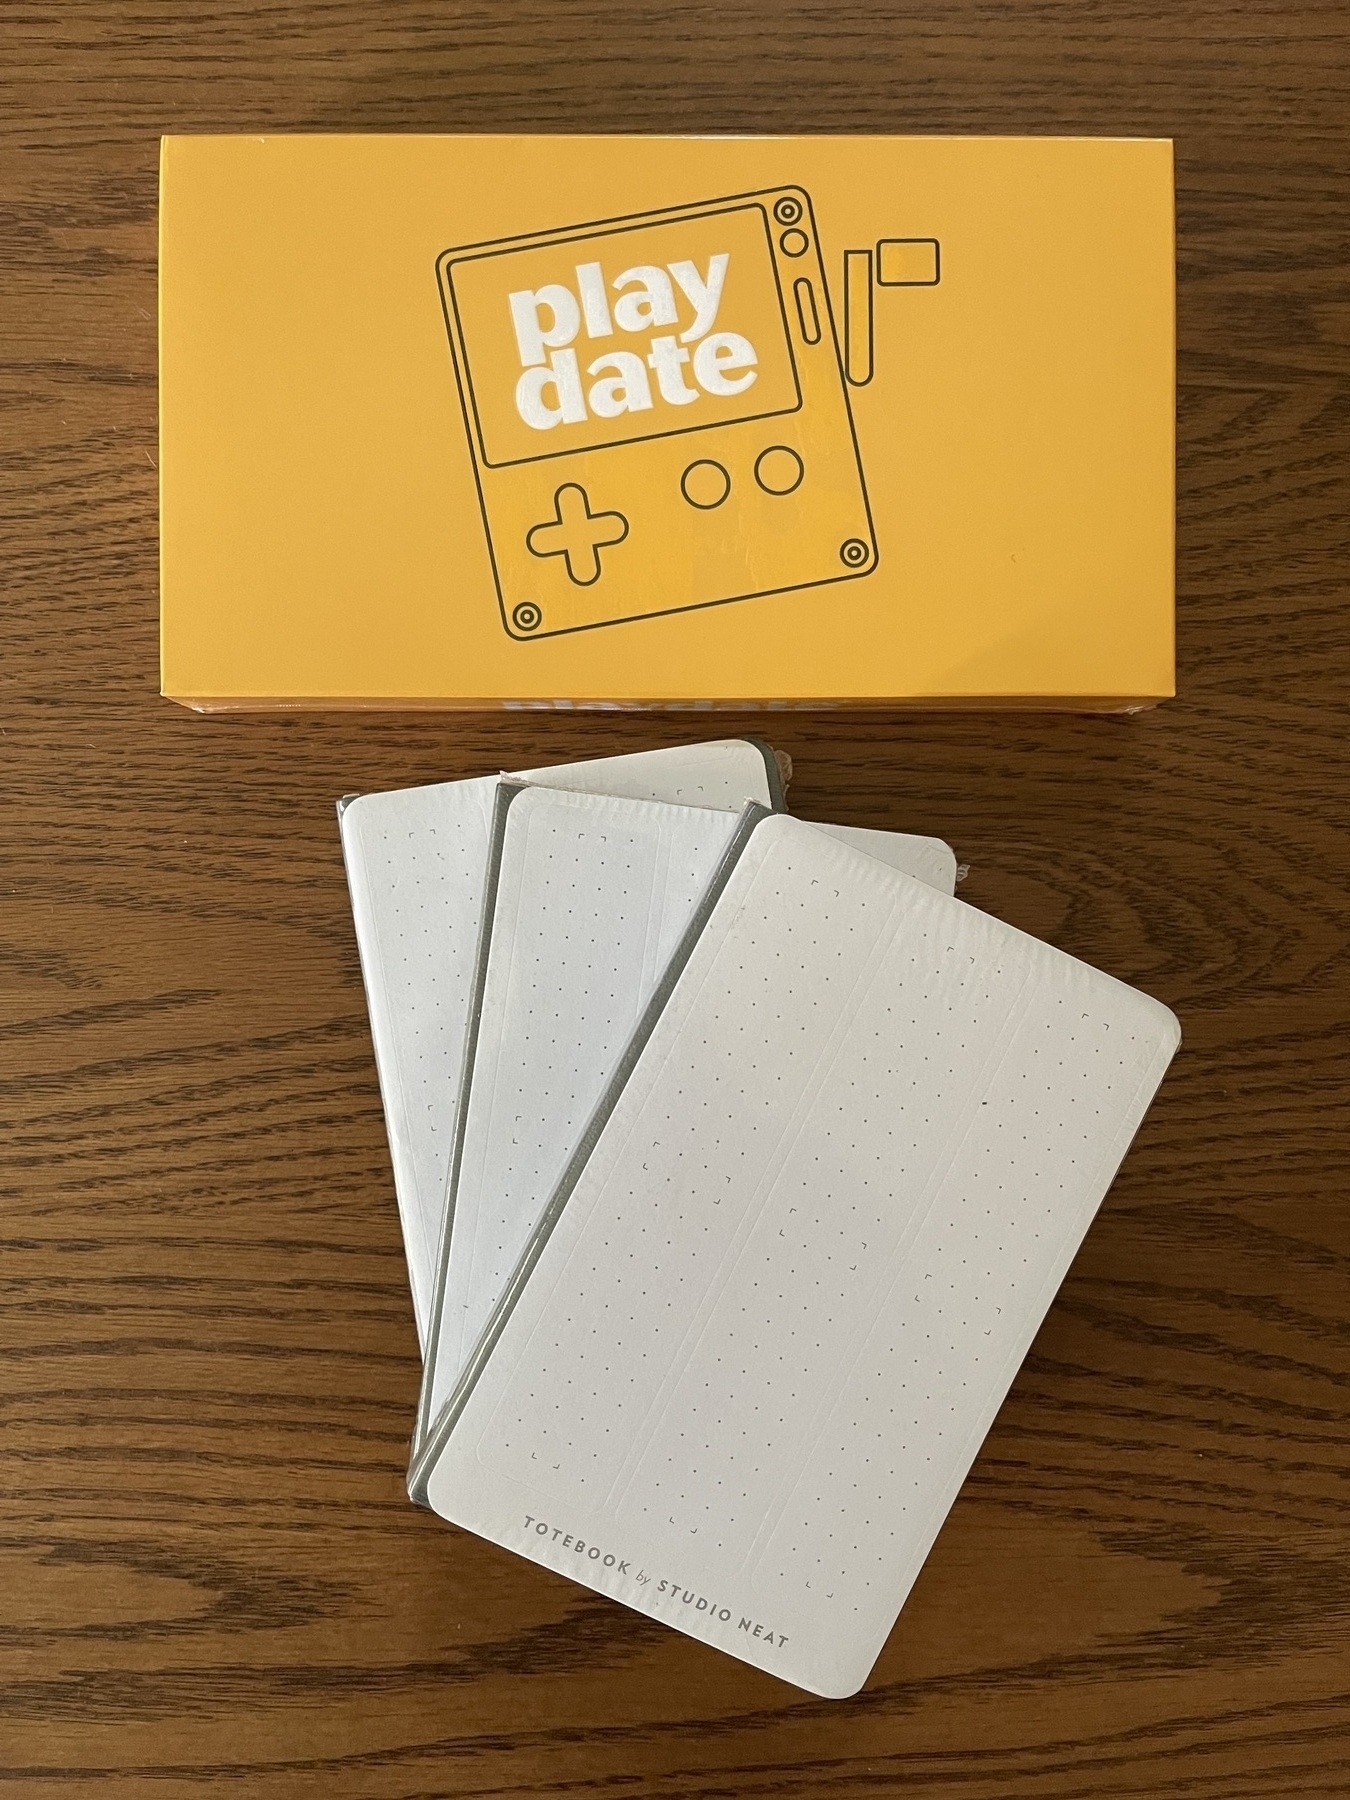 Play.date and totebooks